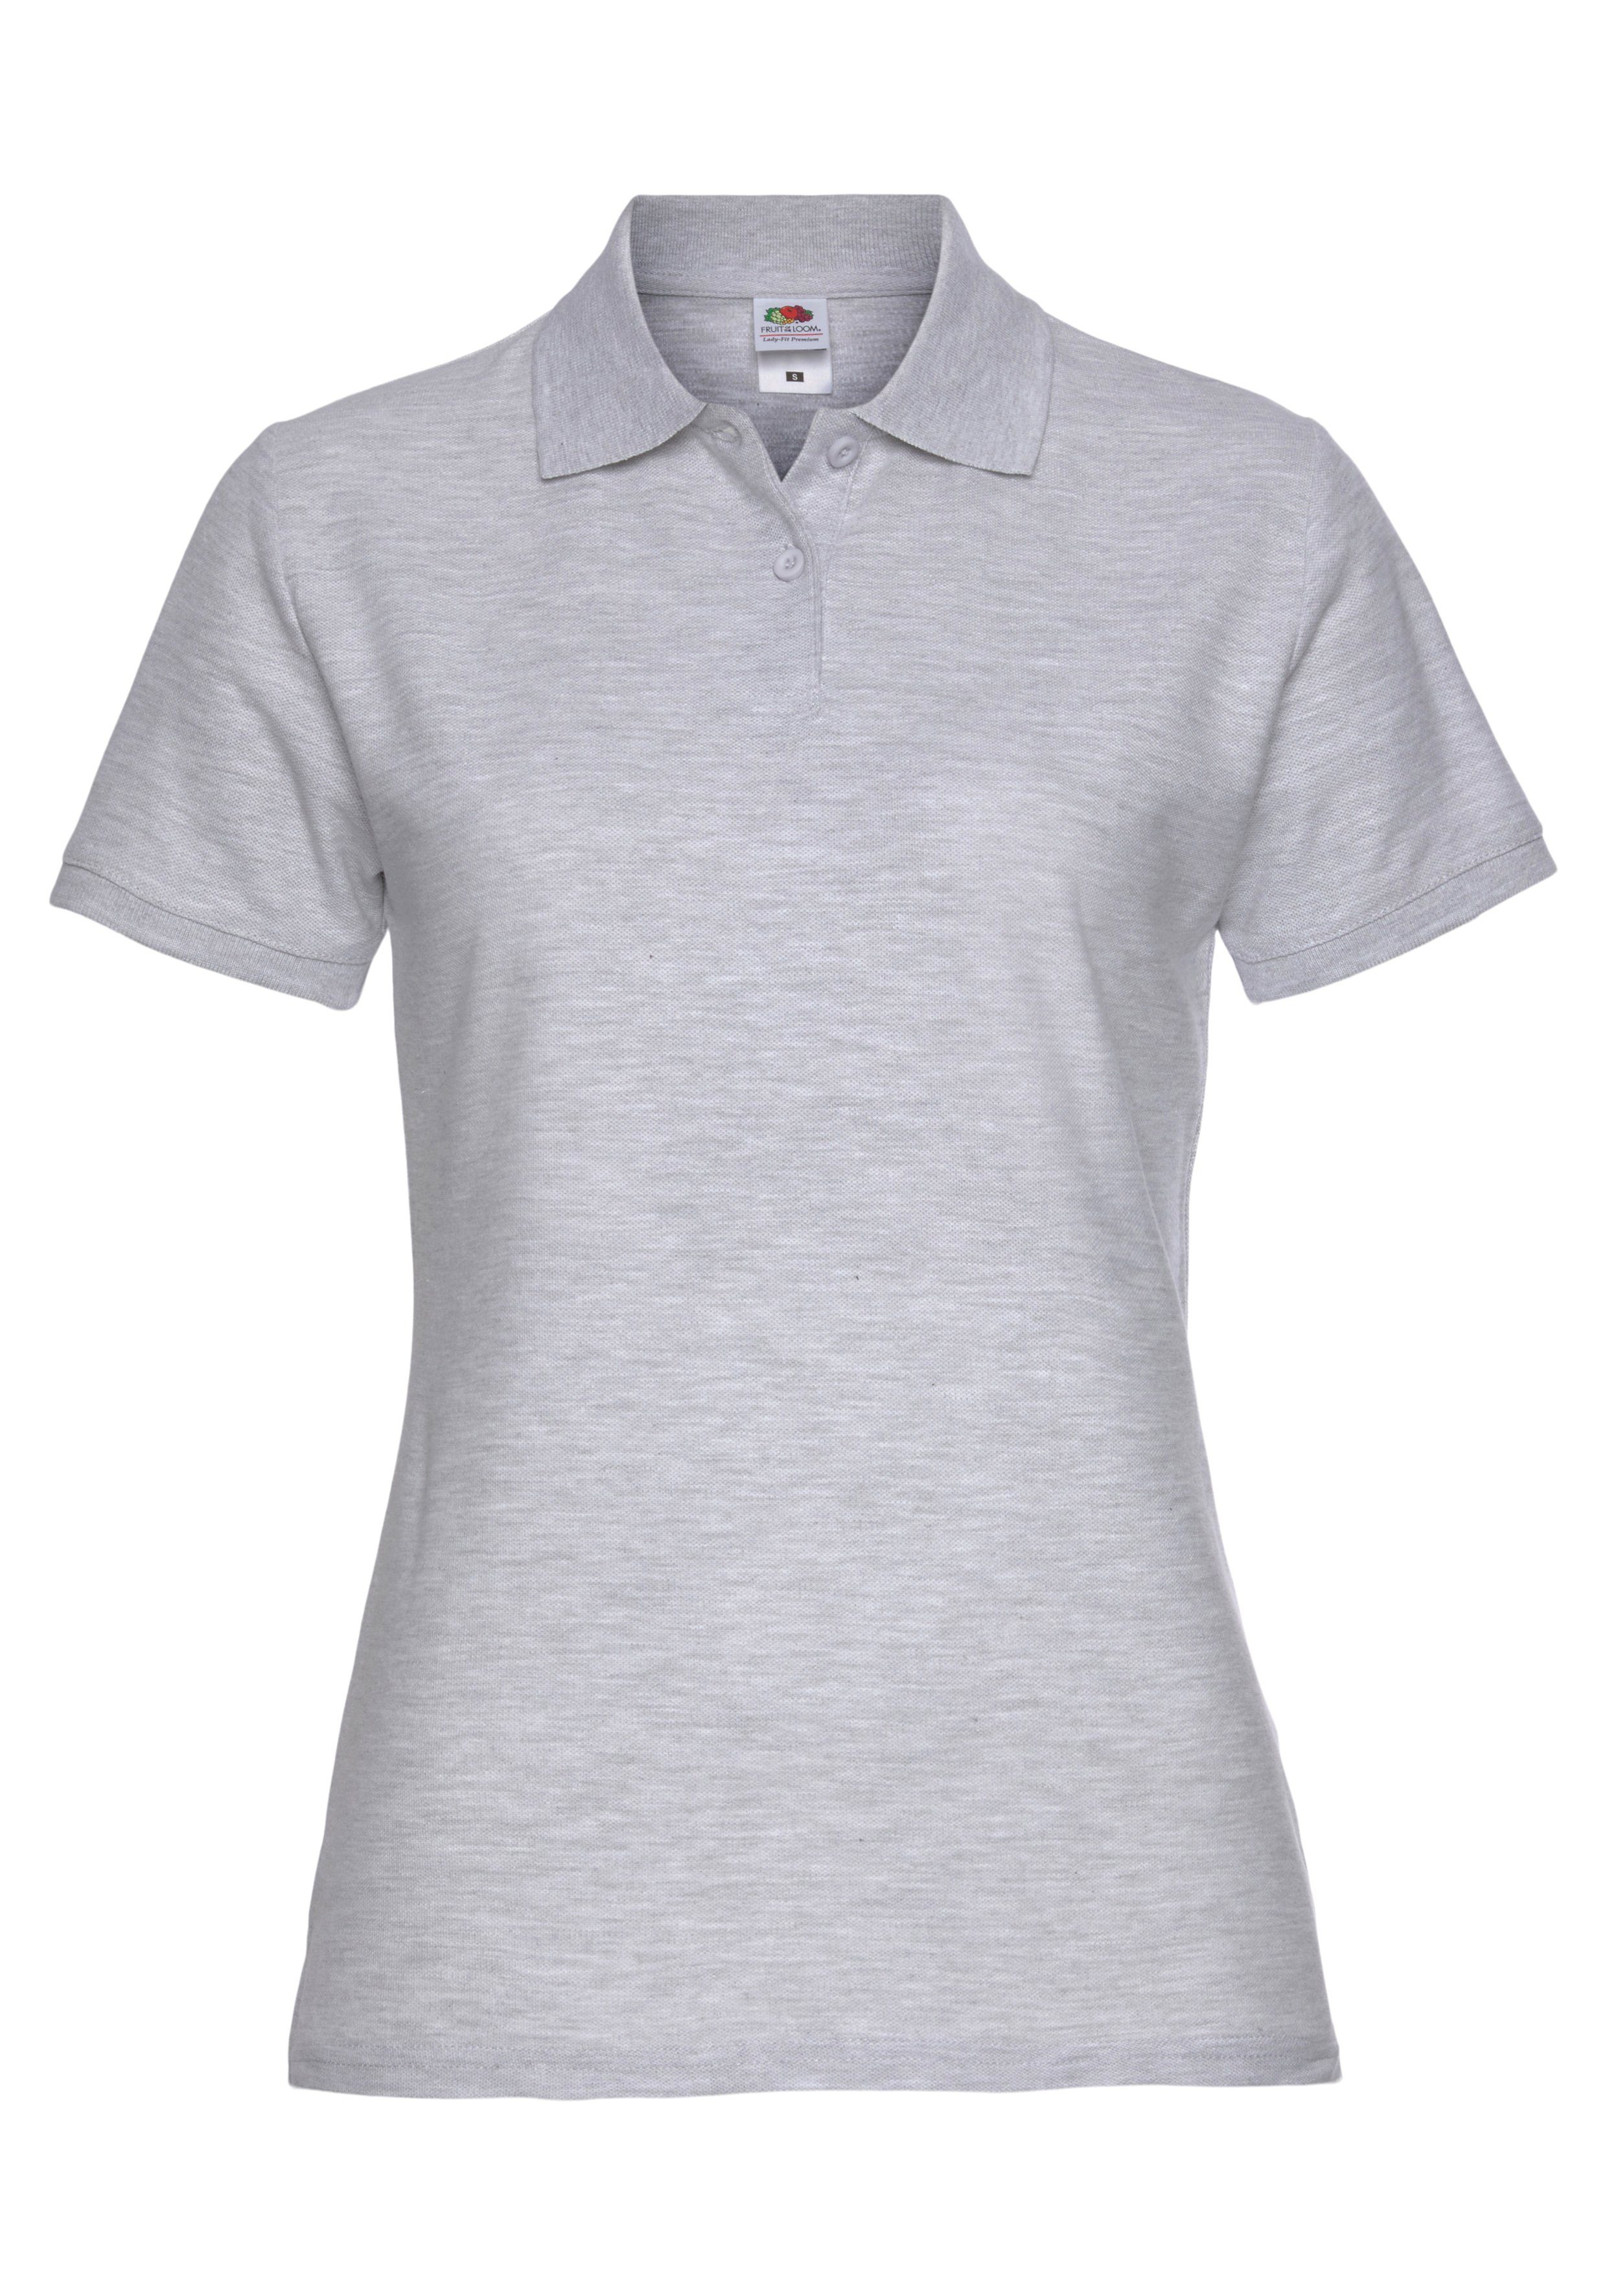 Fruit of the Loom Polo Premium Lady-Fit Poloshirt graumeliert